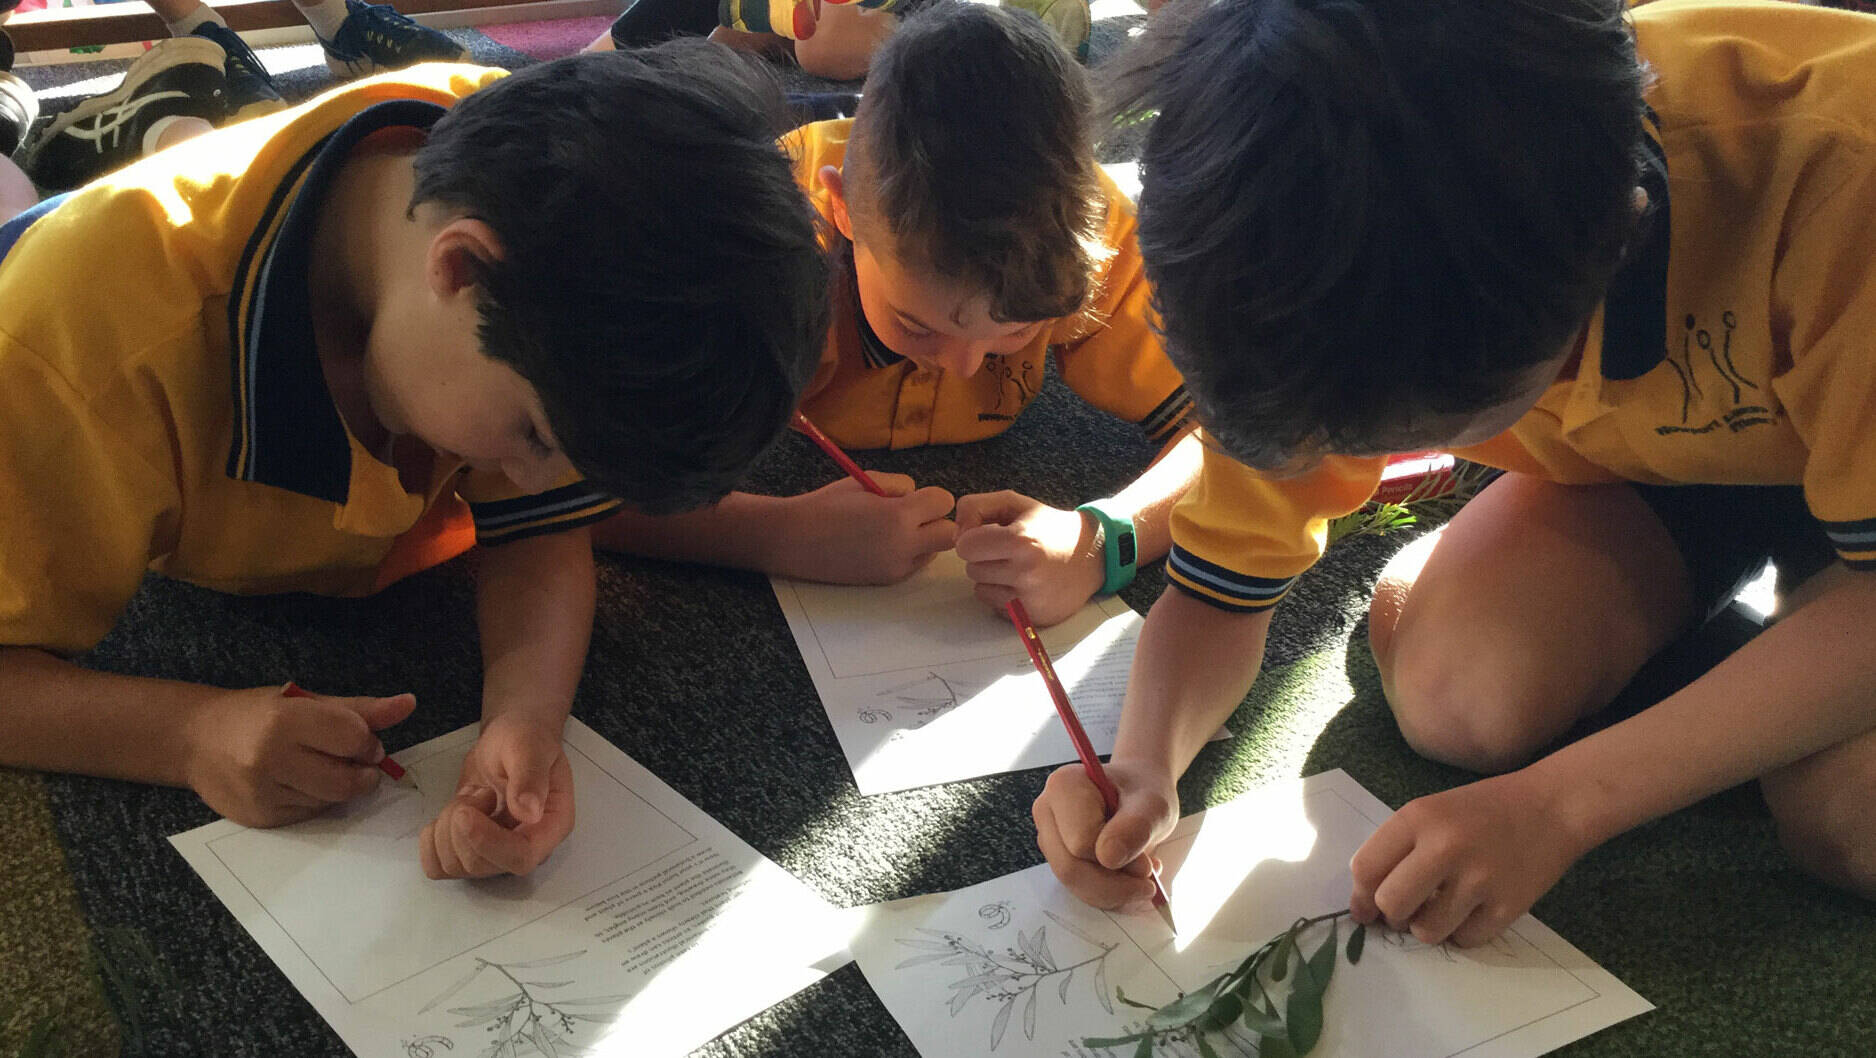 Image Photo — Students from Newport Lakes Primary School take part in the program.